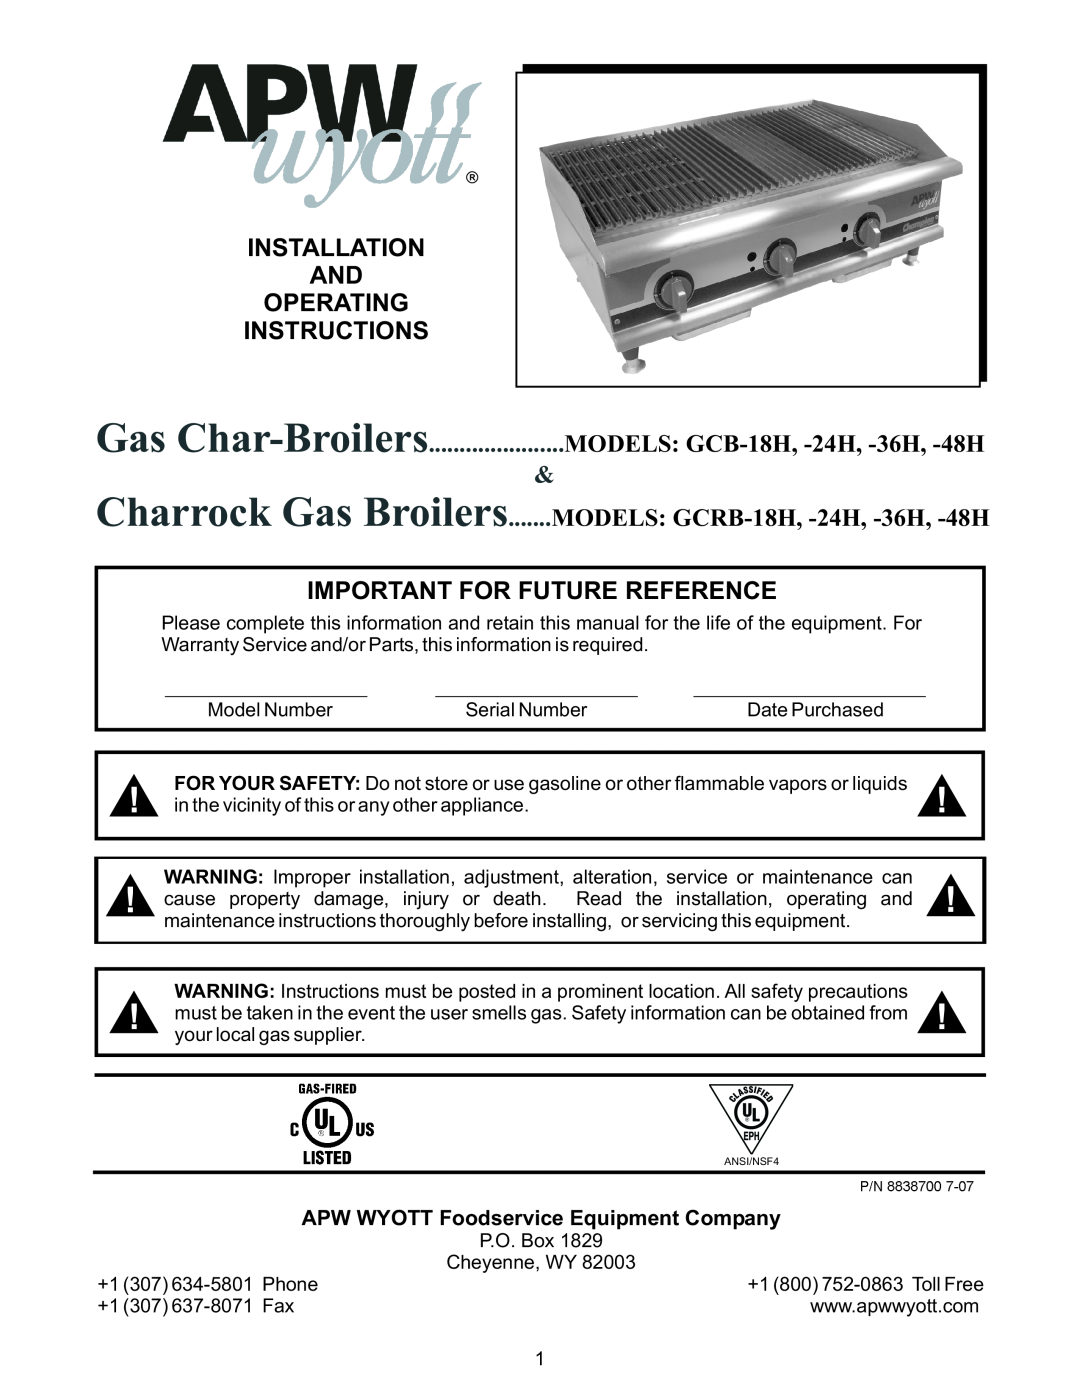 APW Wyott GCRB-36H warranty Installation And Operating Instructions, Important For Future Reference, Charrock Gas Broilers 